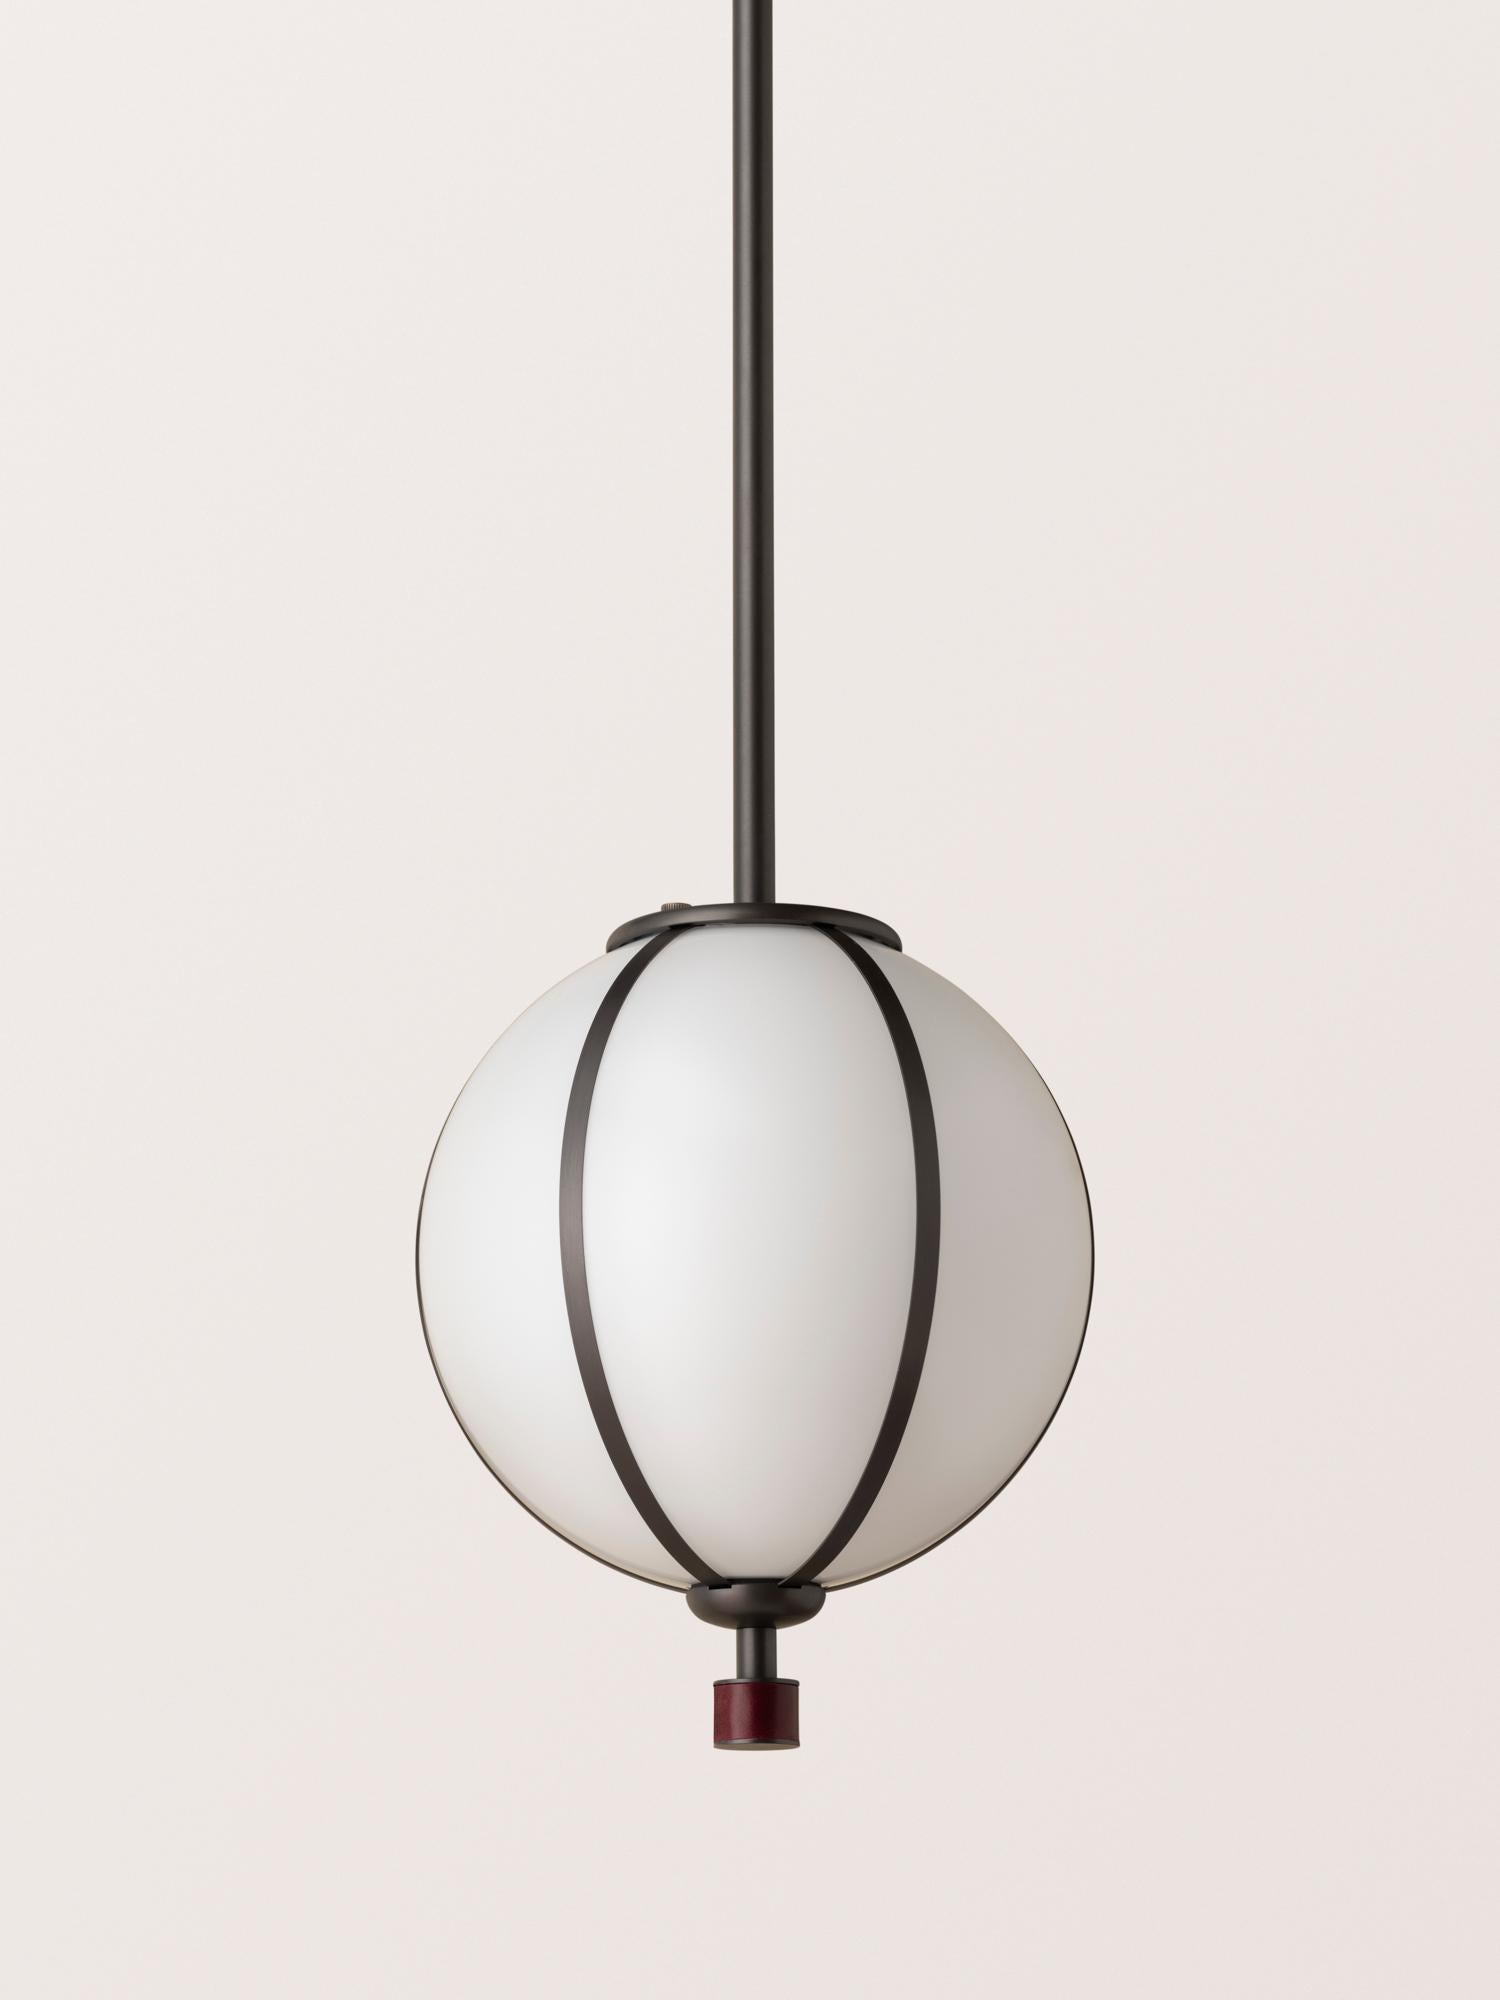 The Rib Pendant - Small Sphere is blown in Italy and delicately framed by thin brass ribs. A cylindrical brass finial, with optional hand-wrapped leather or suede, elongates the fixture and adds a finishing touch of refinement.

This listing is